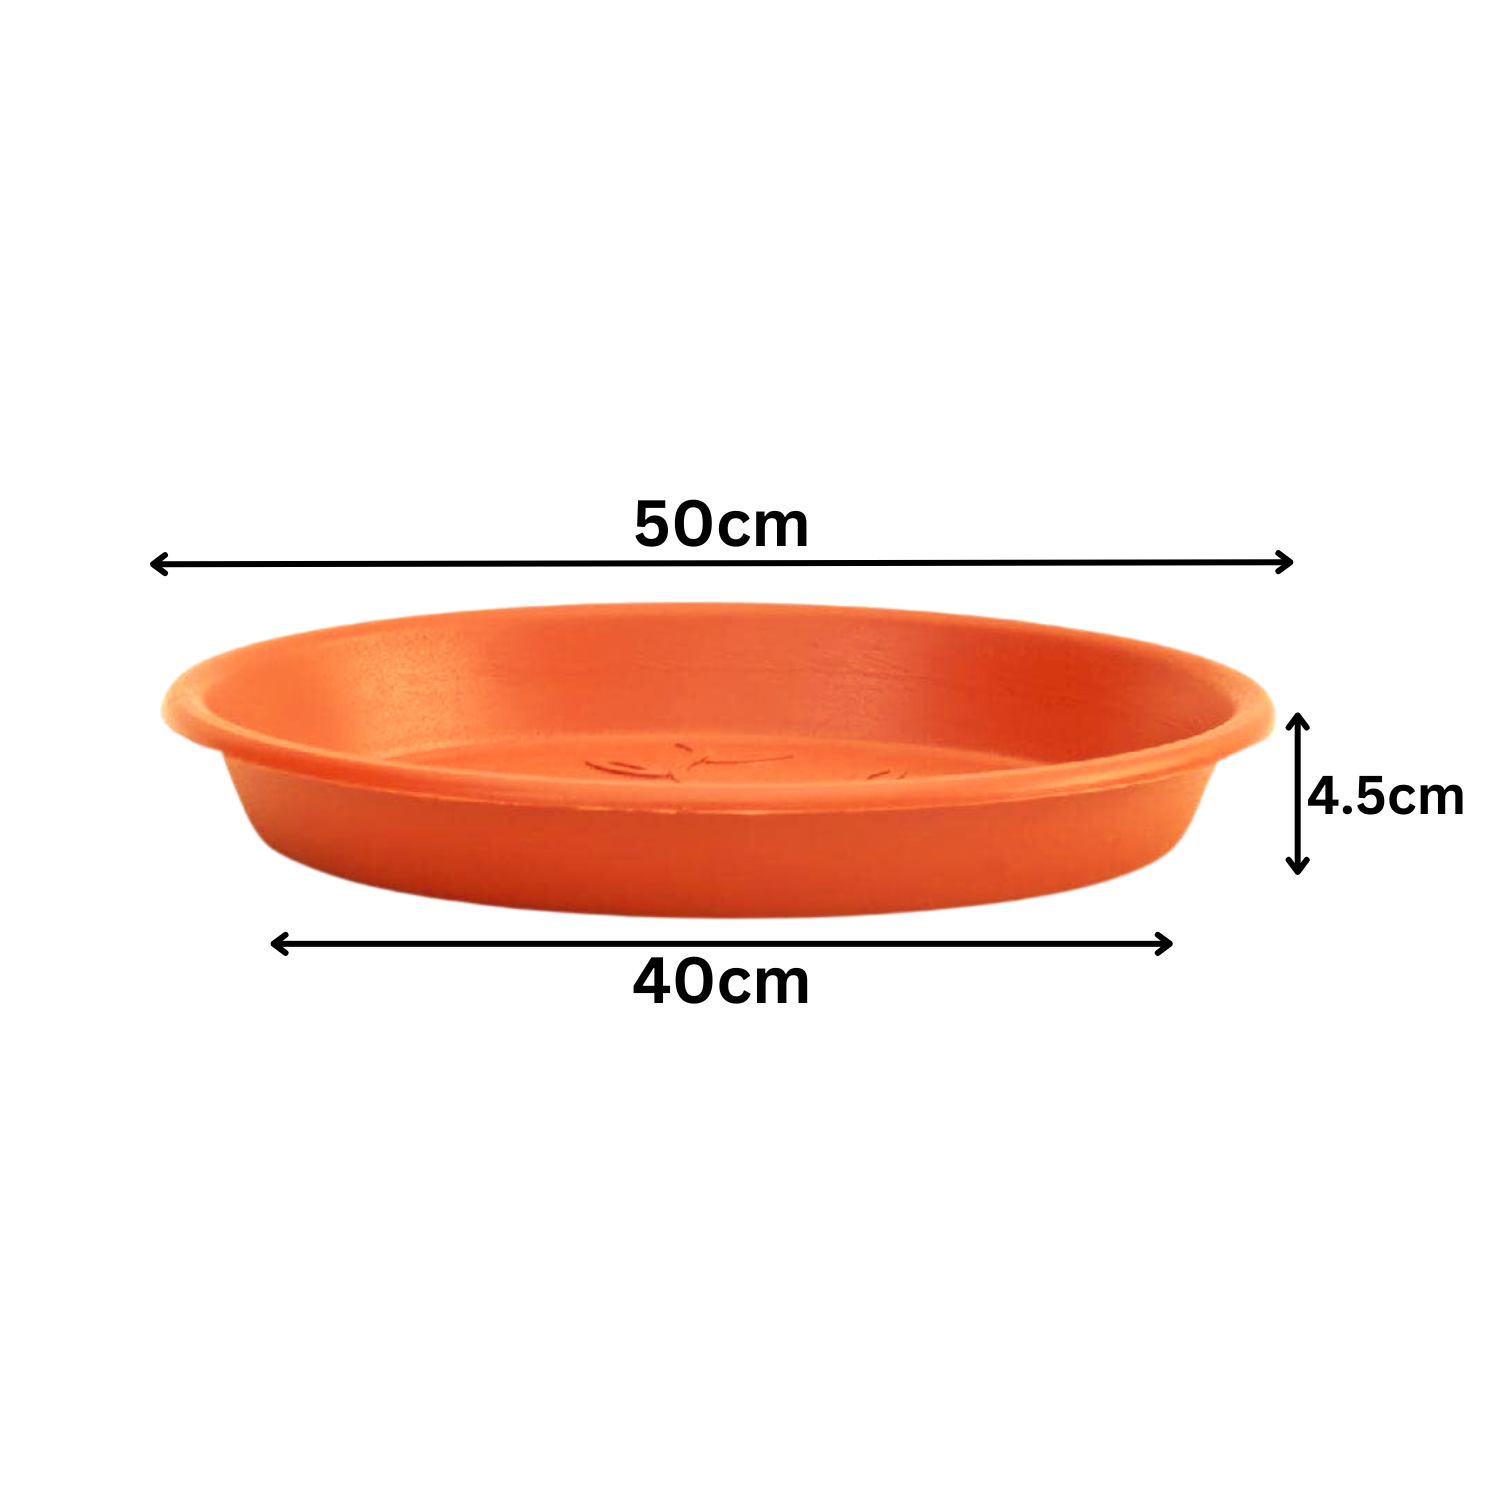 Hug A Plant|UV Treated Round Bottom Tray Suitable for 18 inch Round Plastic Pot|Heavy Duty Highly Durable Tray for Indoor Home & Garden Decor (45CM|18INCH)